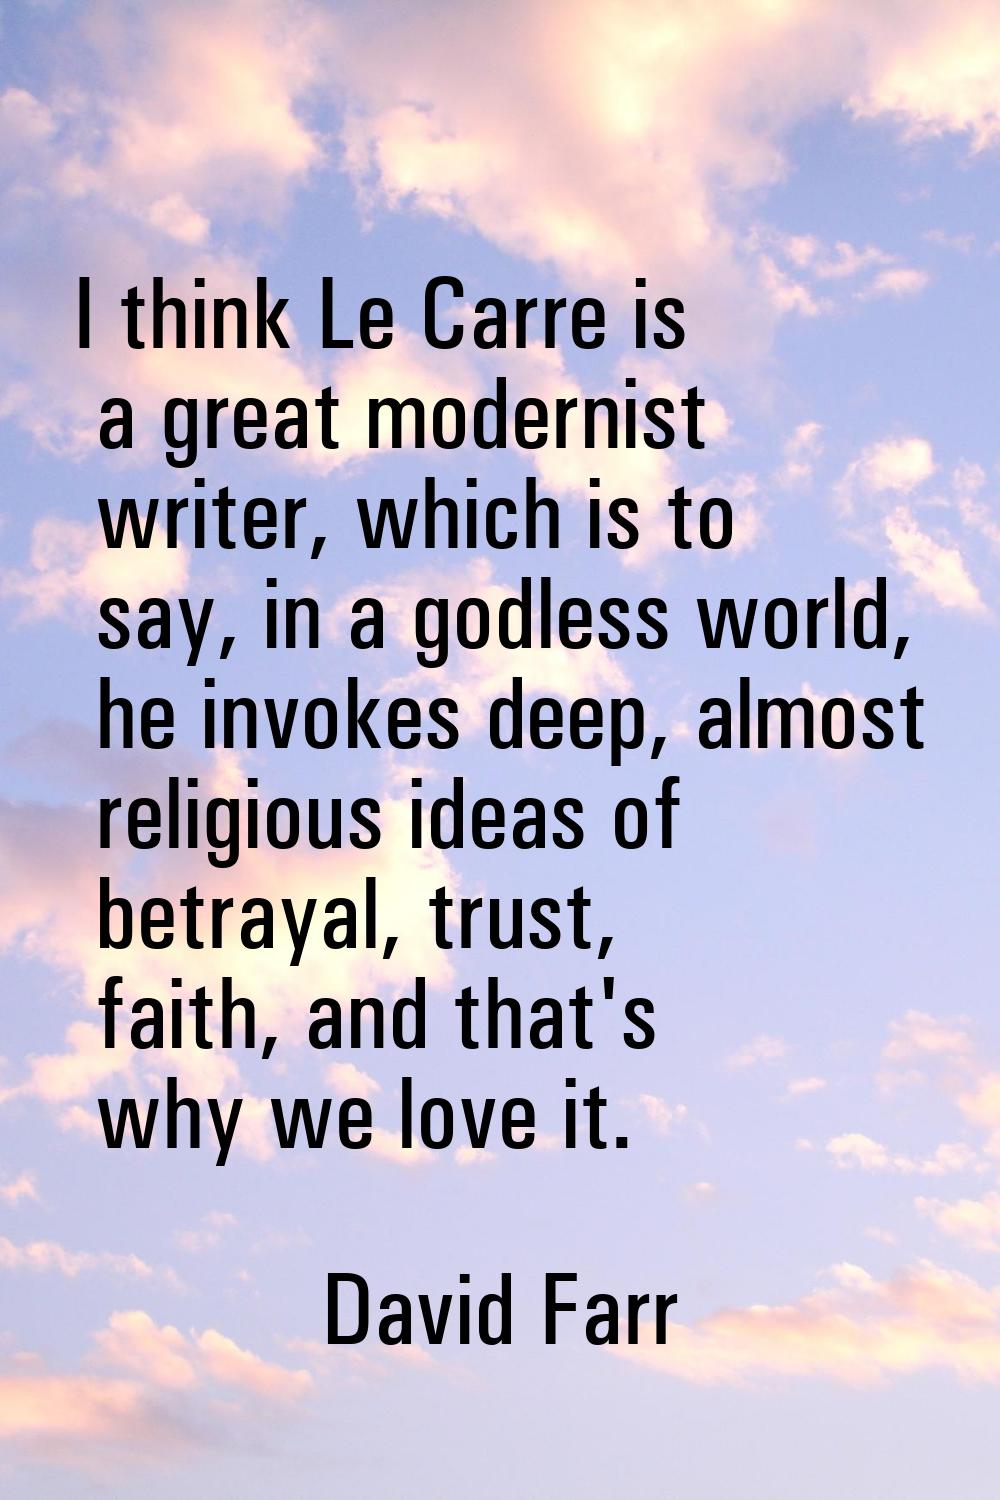 I think Le Carre is a great modernist writer, which is to say, in a godless world, he invokes deep,